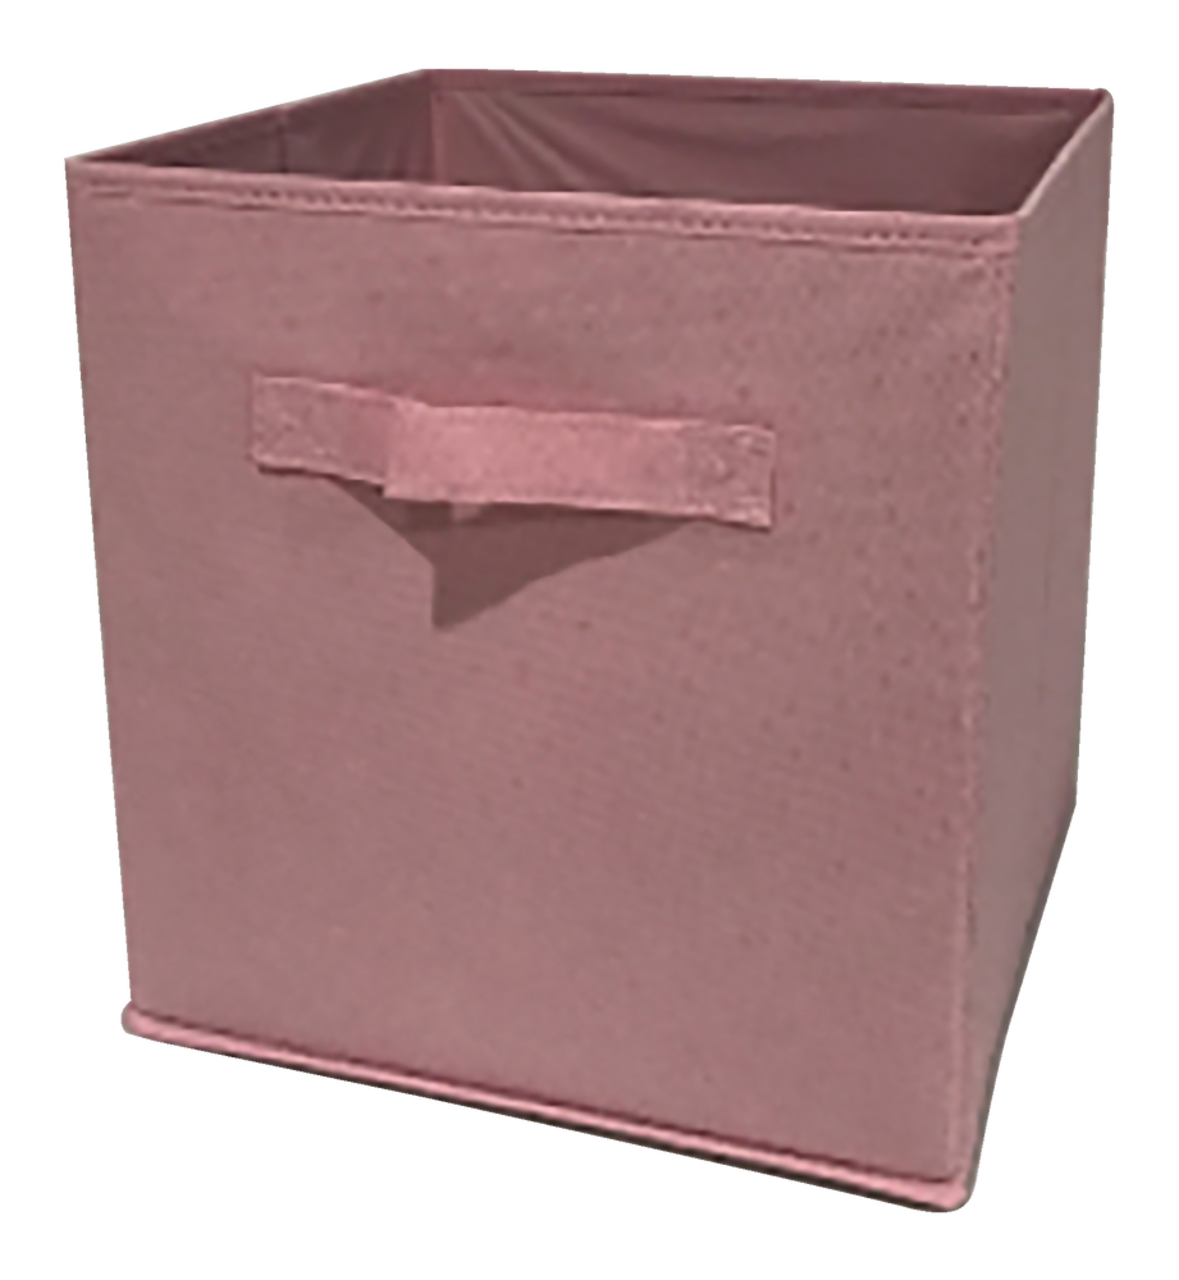 https://media-www.canadiantire.ca/product/living/home-decor/decor-accents/0687175/for-living-pink-fabric-cube-10-5in-x-11in--03628a13-479c-4d7d-9e5d-7c2cd0875b92.png?imdensity=1&imwidth=640&impolicy=mZoom